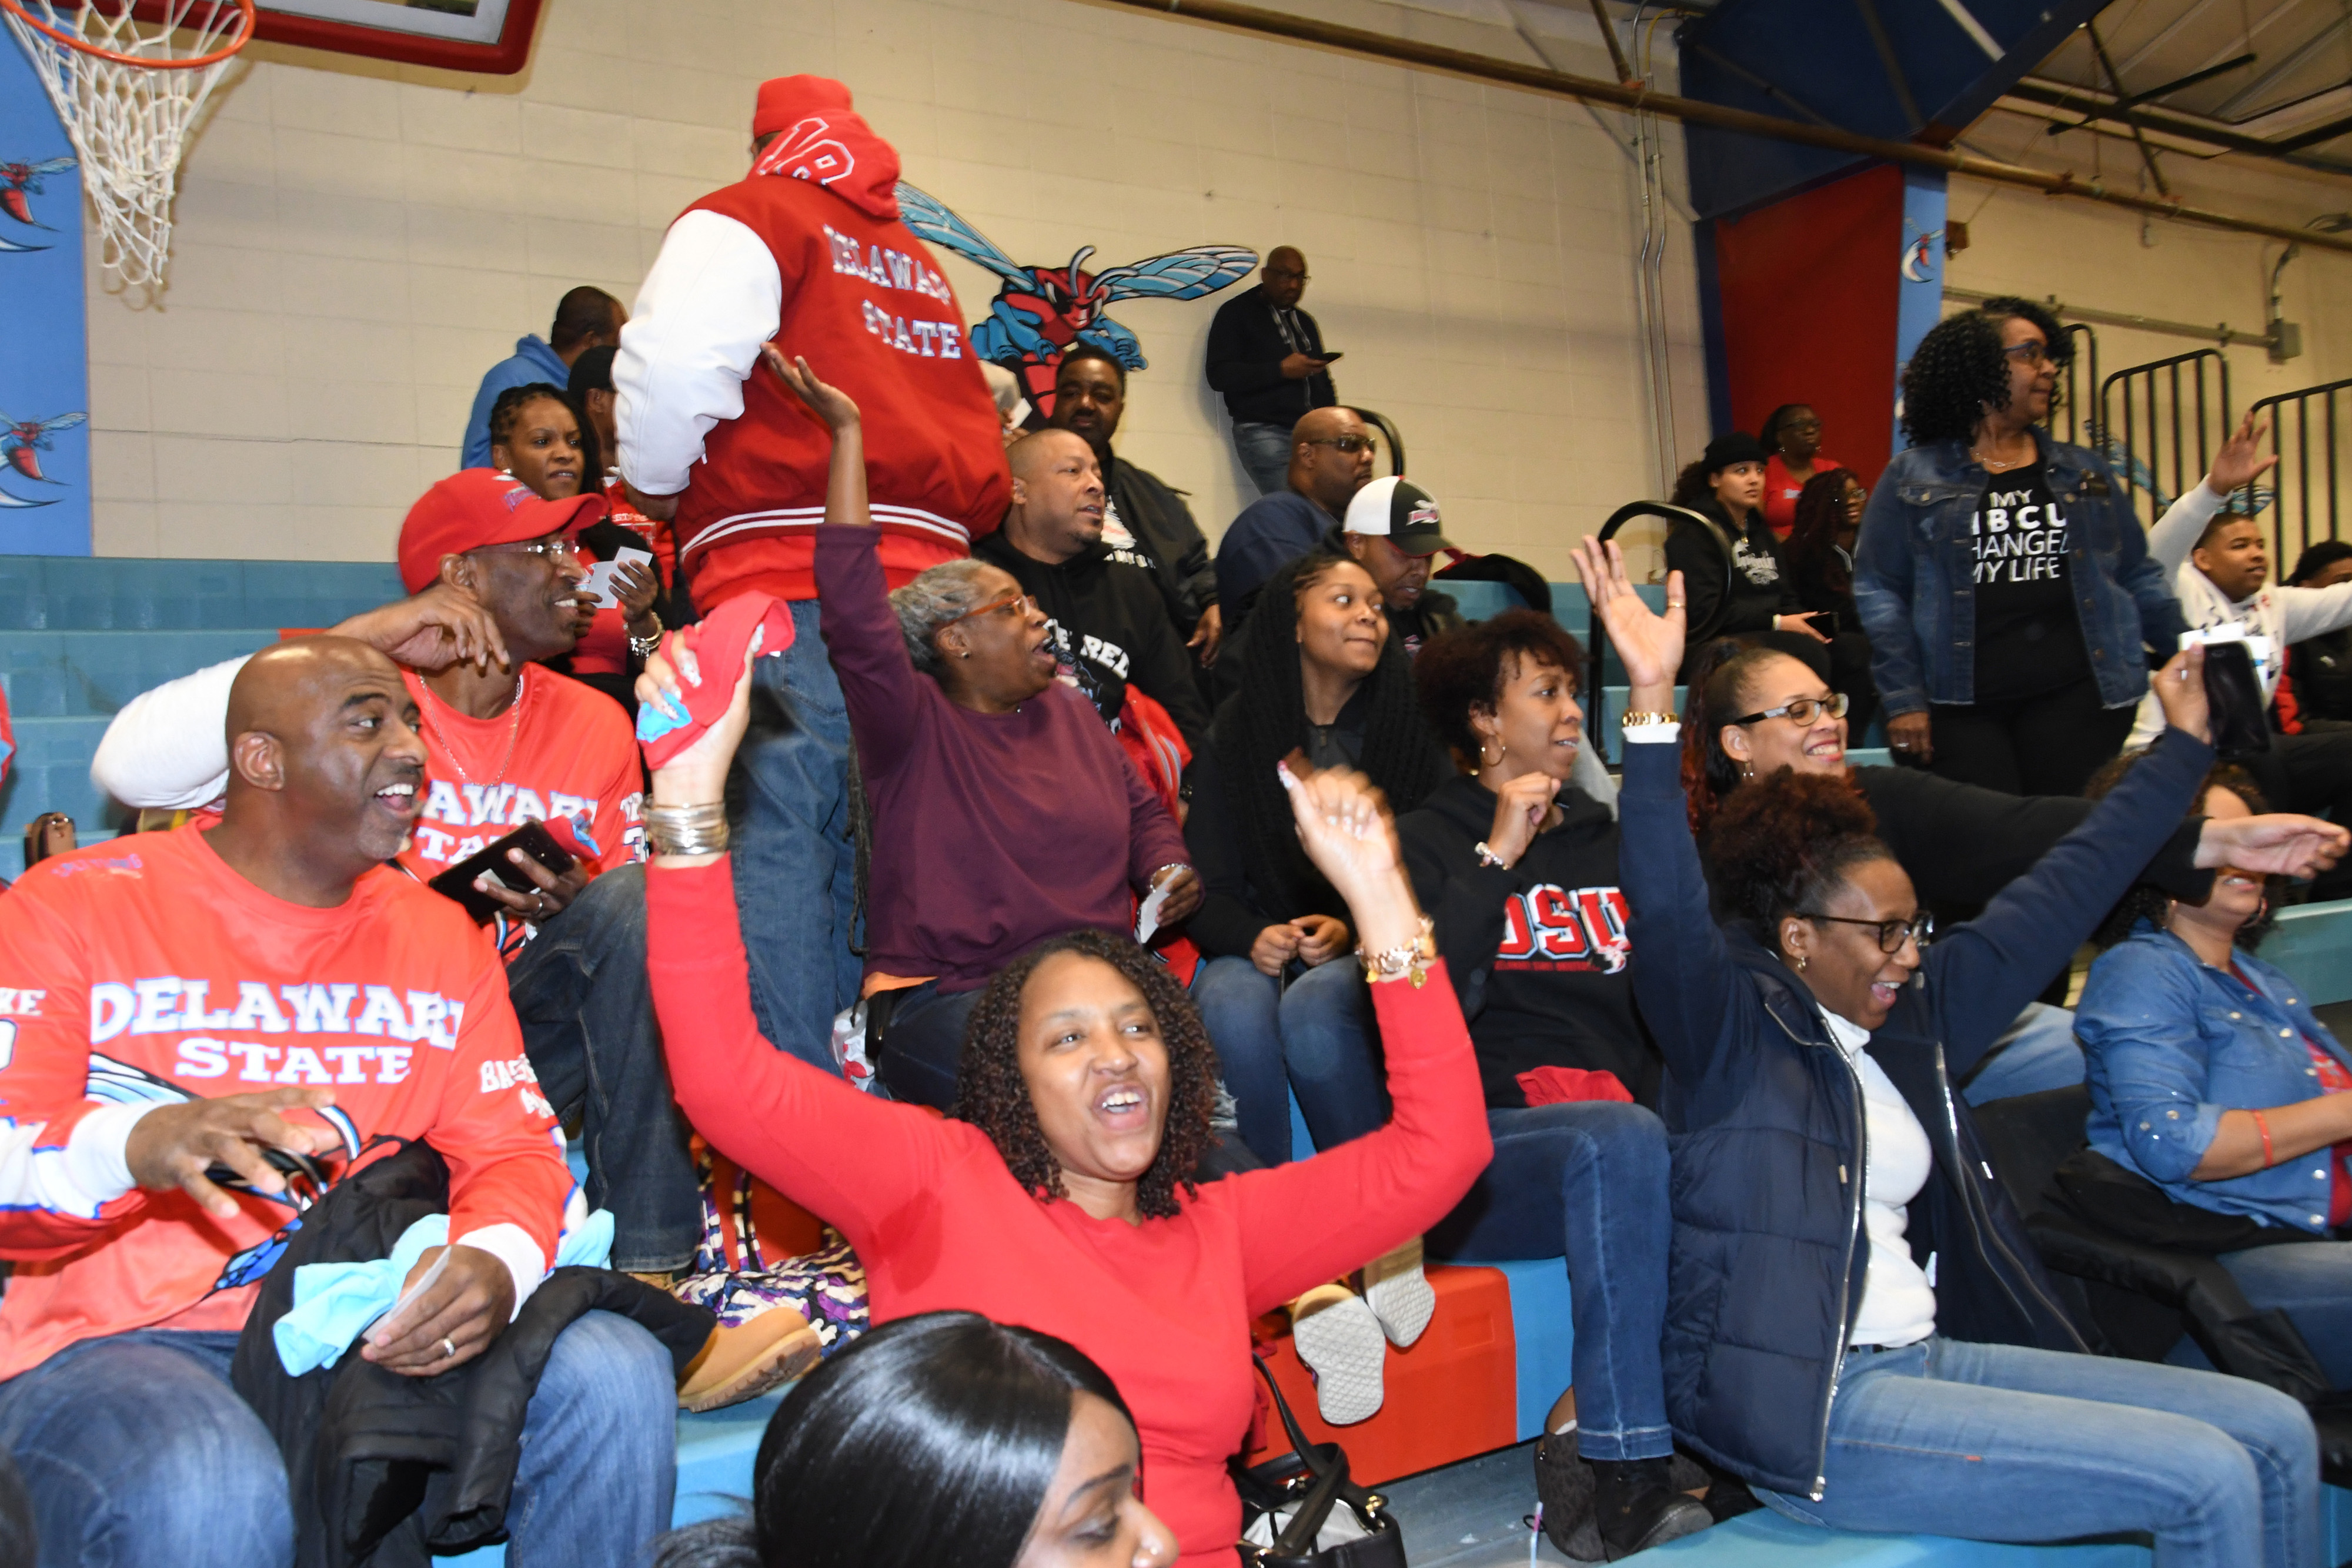 Delaware State University grads had a Hornet of a good time during the Alumni Day event at the UMES vs. DSU basketball doubleheader at Memorial Hall